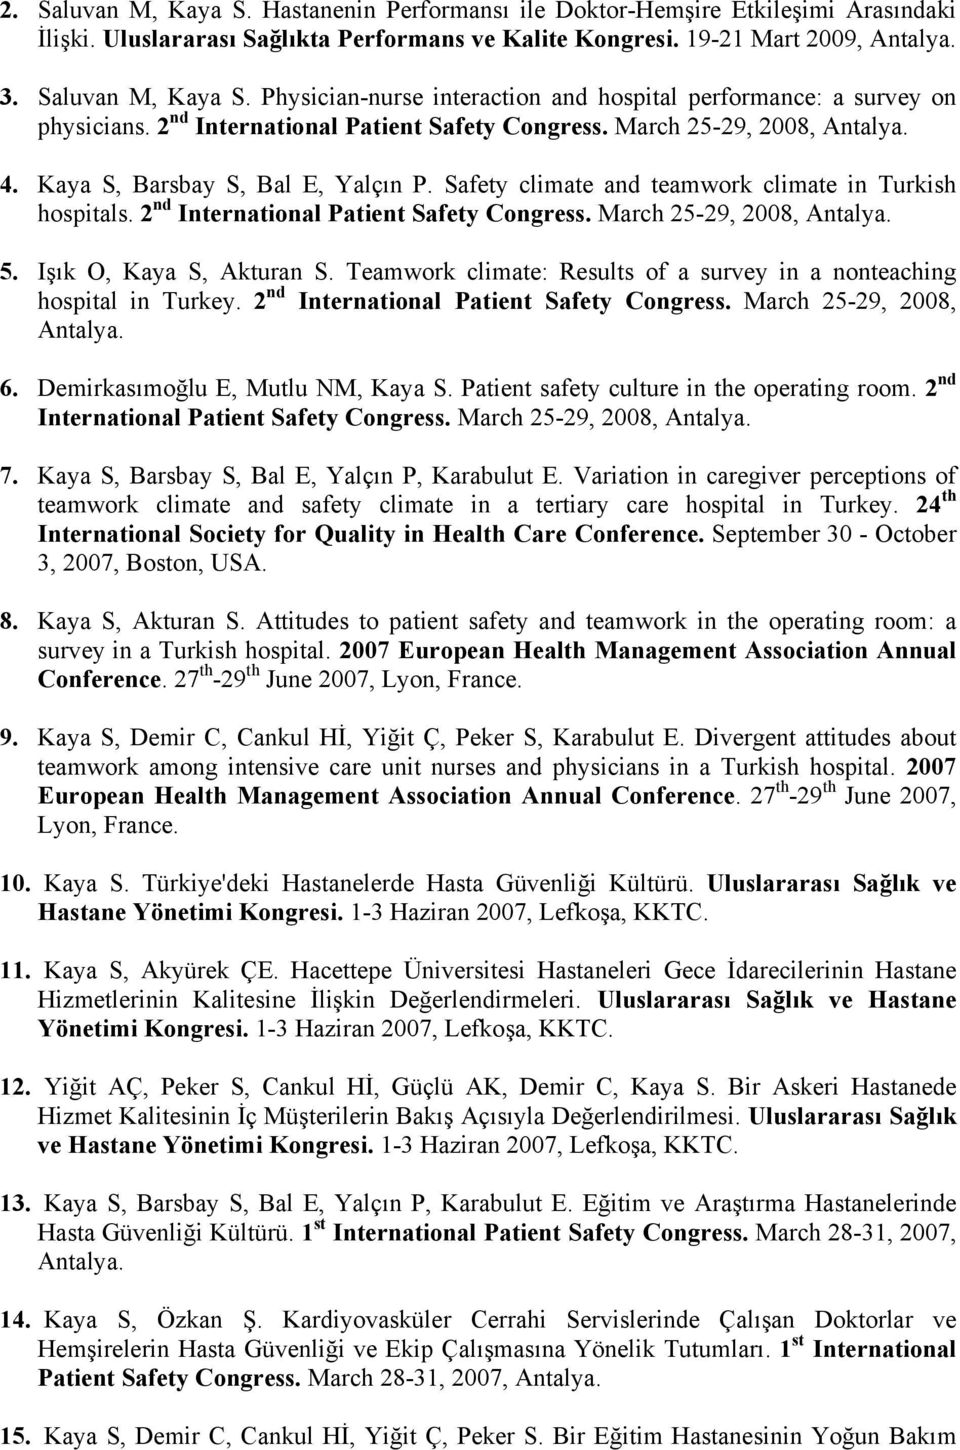 2 nd International Patient Safety Congress. March 25-29, 2008, Antalya. 5. Işık O, Kaya S, Akturan S. Teamwork climate: Results of a survey in a nonteaching hospital in Turkey.